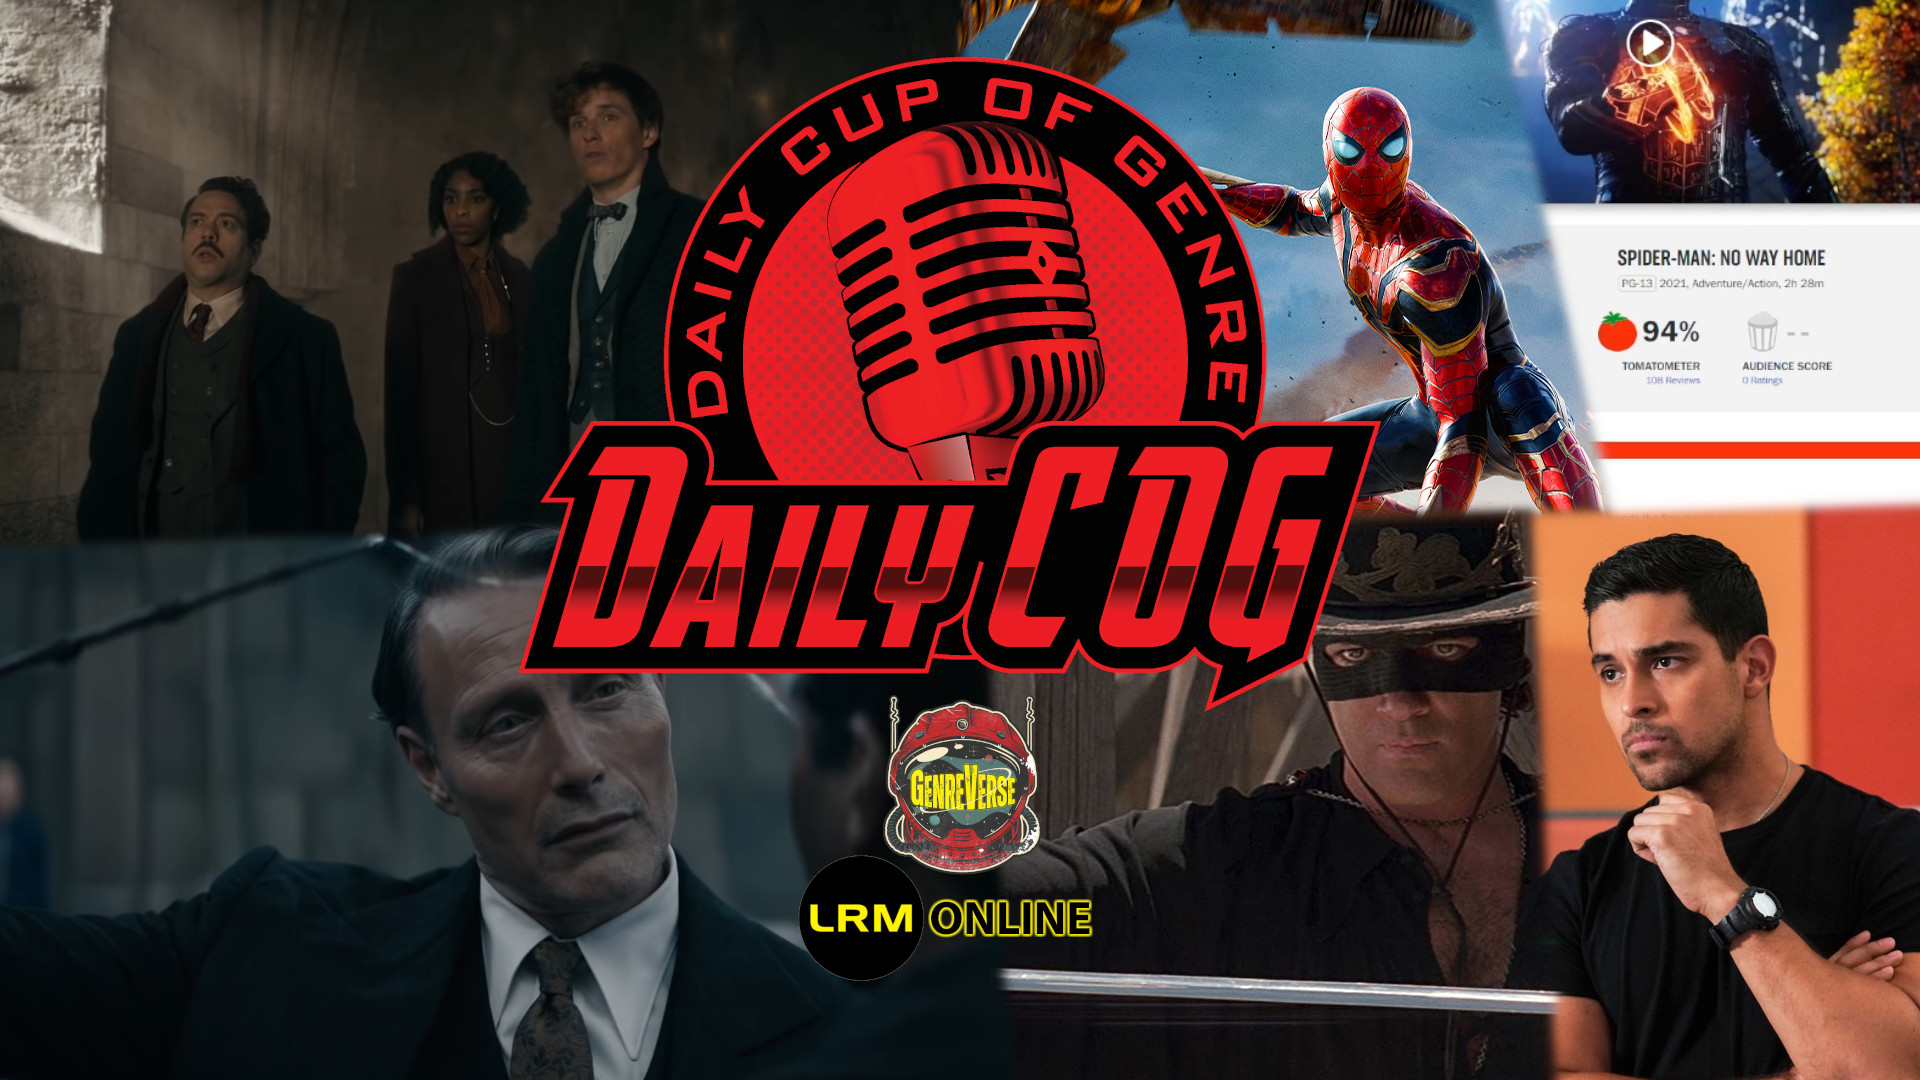 New Zorro Series Announced For Disney, Spider-Man No Way Home First Reactions & Reviews, Fantastic Beasts The Secrets Of Dumbledore Trailer Reaction Daily COG